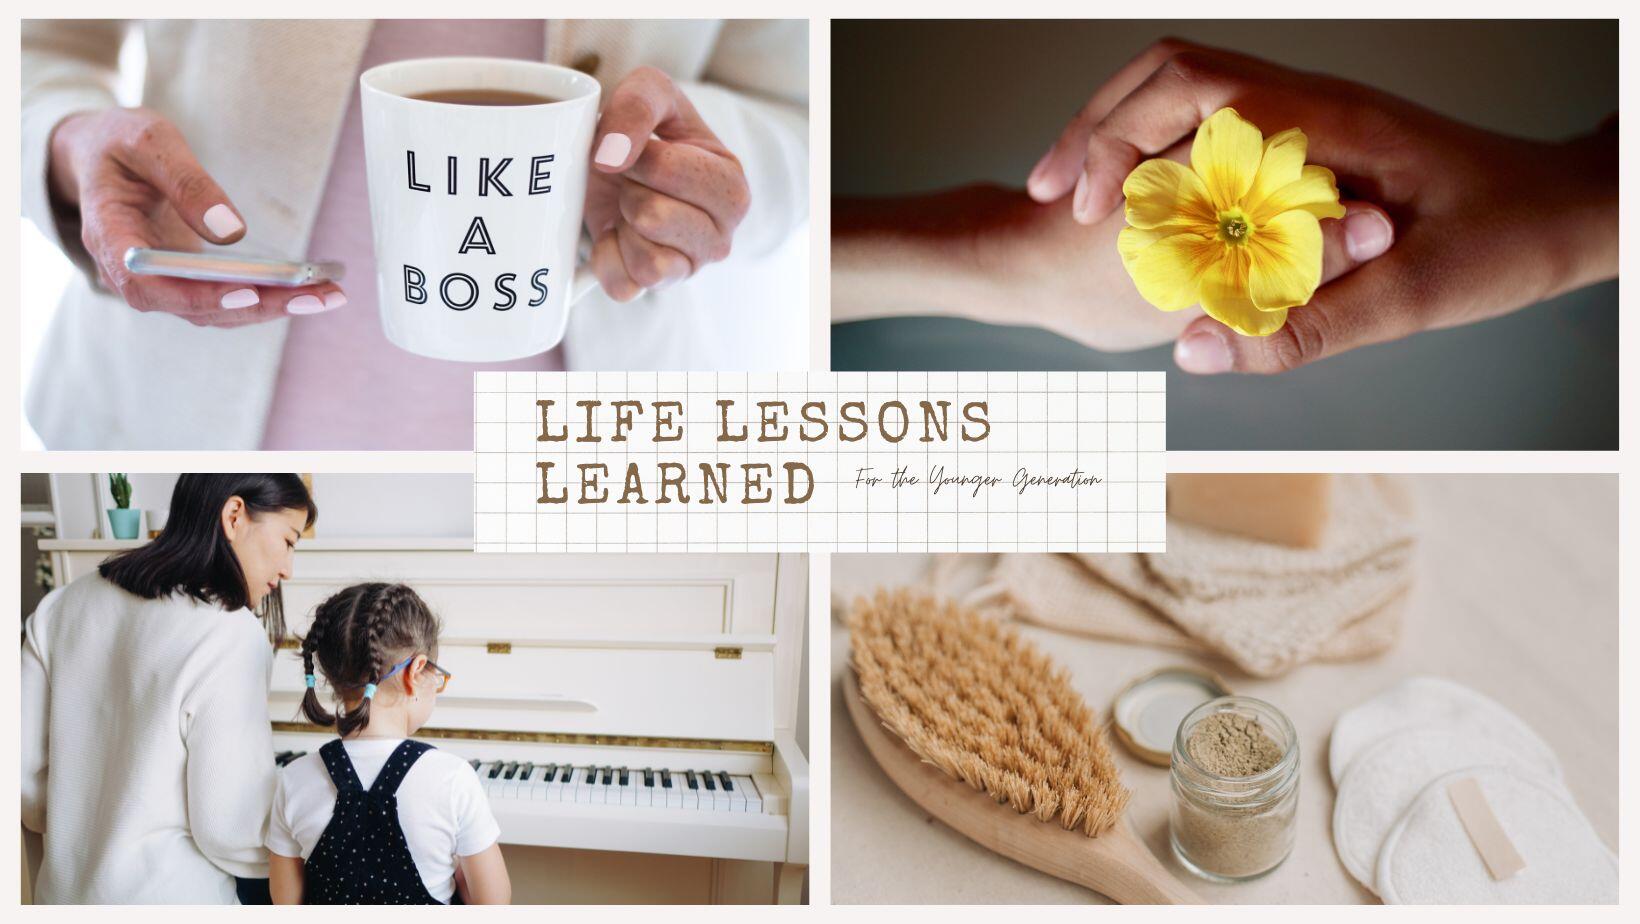 Image for Blog post life lessons Learned written by blogger over 50 years old, Kathy Brown. Image depicks various stages of life, raising children, working like a girl boss and traveling